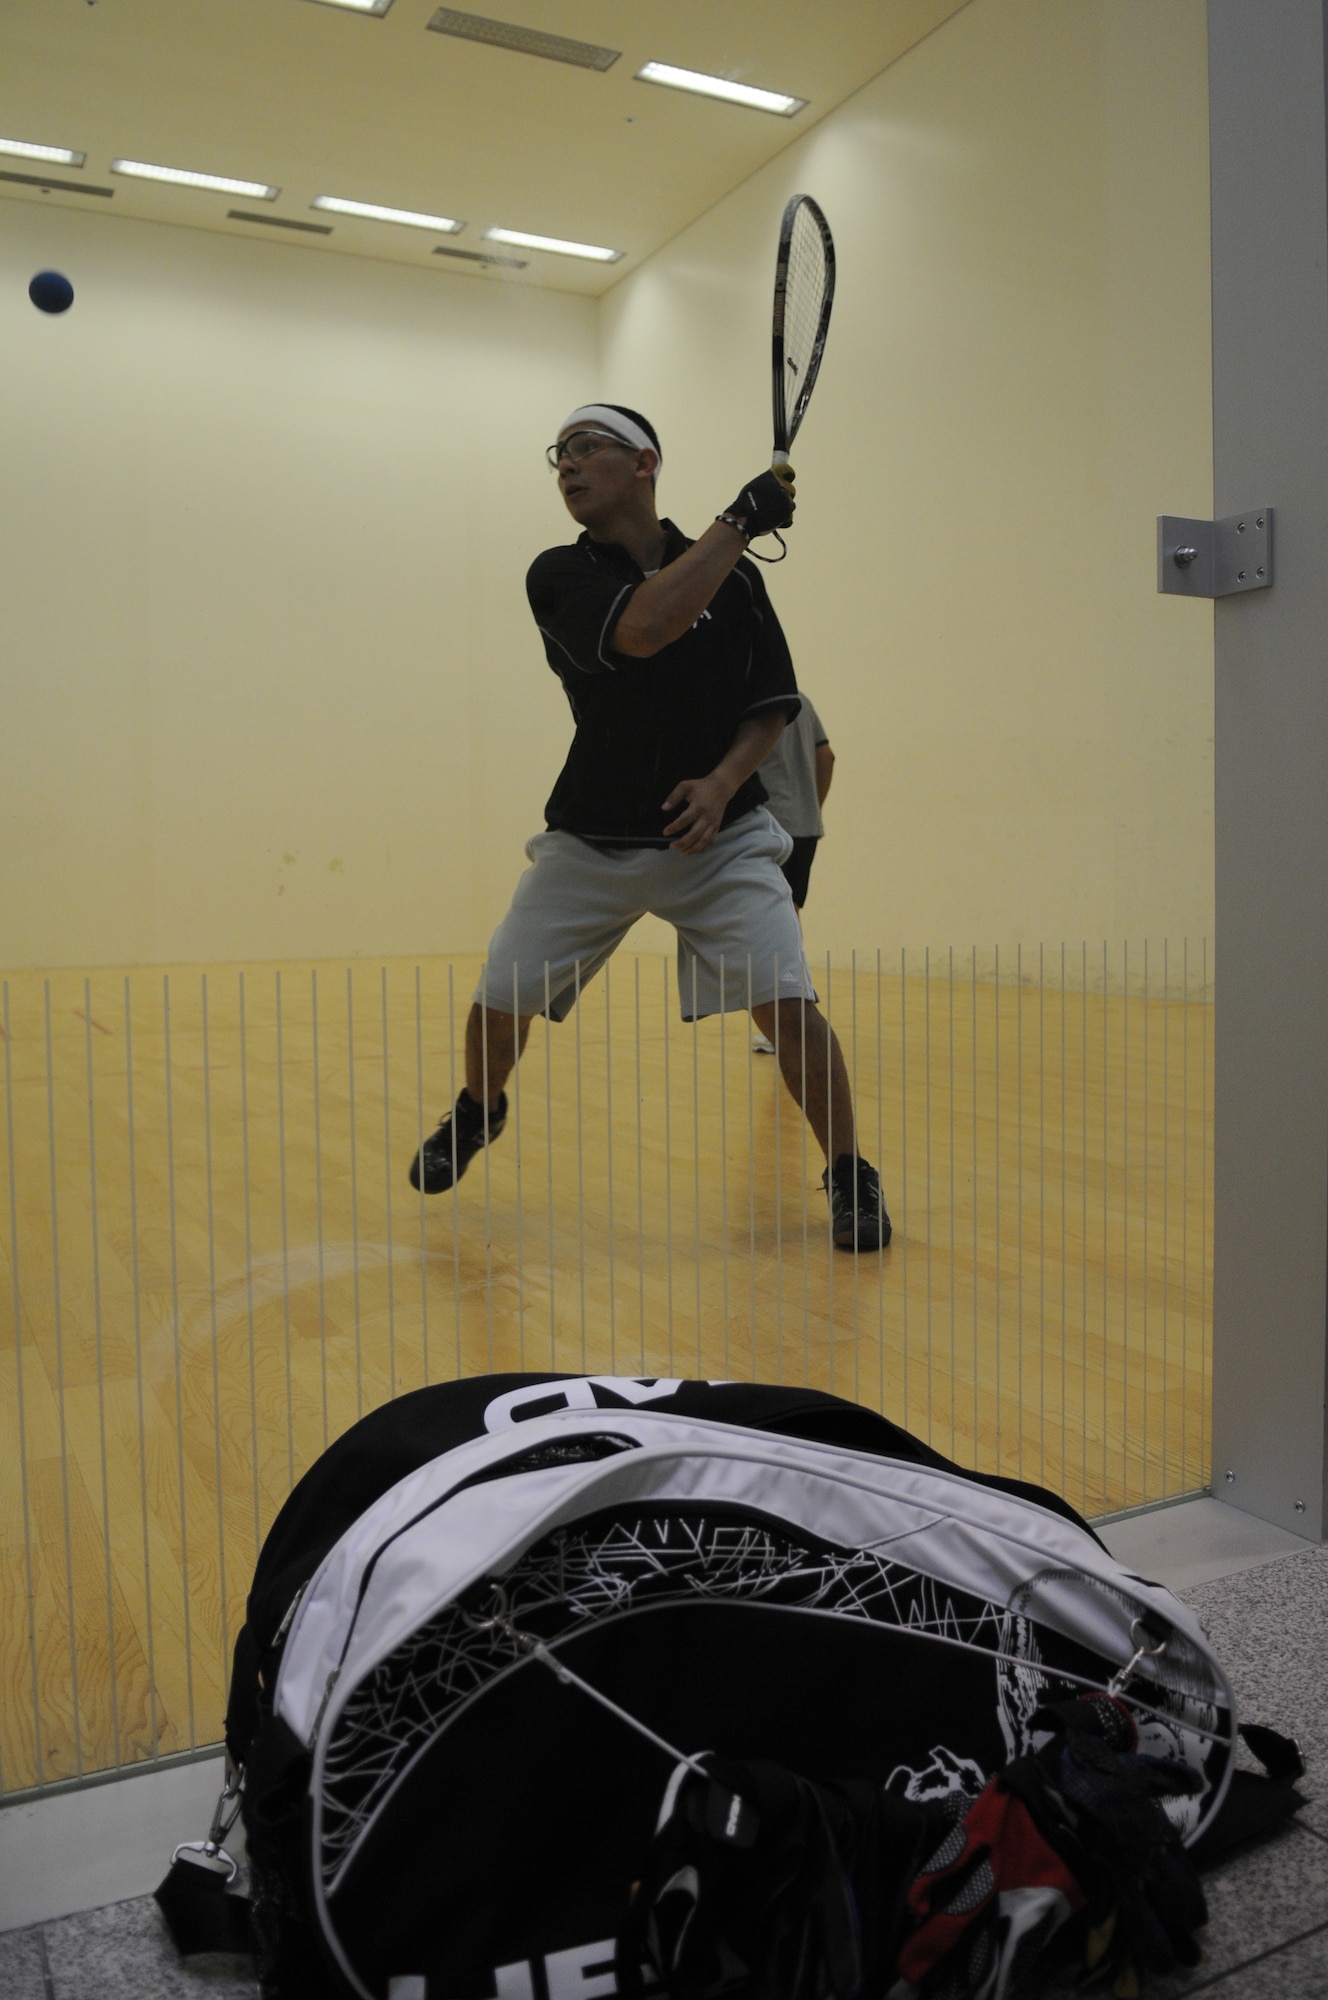 U.S. Air Force Airman 1st Class Grovert Fuentes-Contreras, 86th Airlift Wing Public Affairs photographer, prepares to hit the ball while playing racquetball at the Southside Fitness Center, Aug. 25, 2009, Ramstein Air Base, Germany. Racquetball is one of the many ways Airmen are keeping in shape. (U.S. Air Force photo by Airman 1st Class Alexandria Mosness)